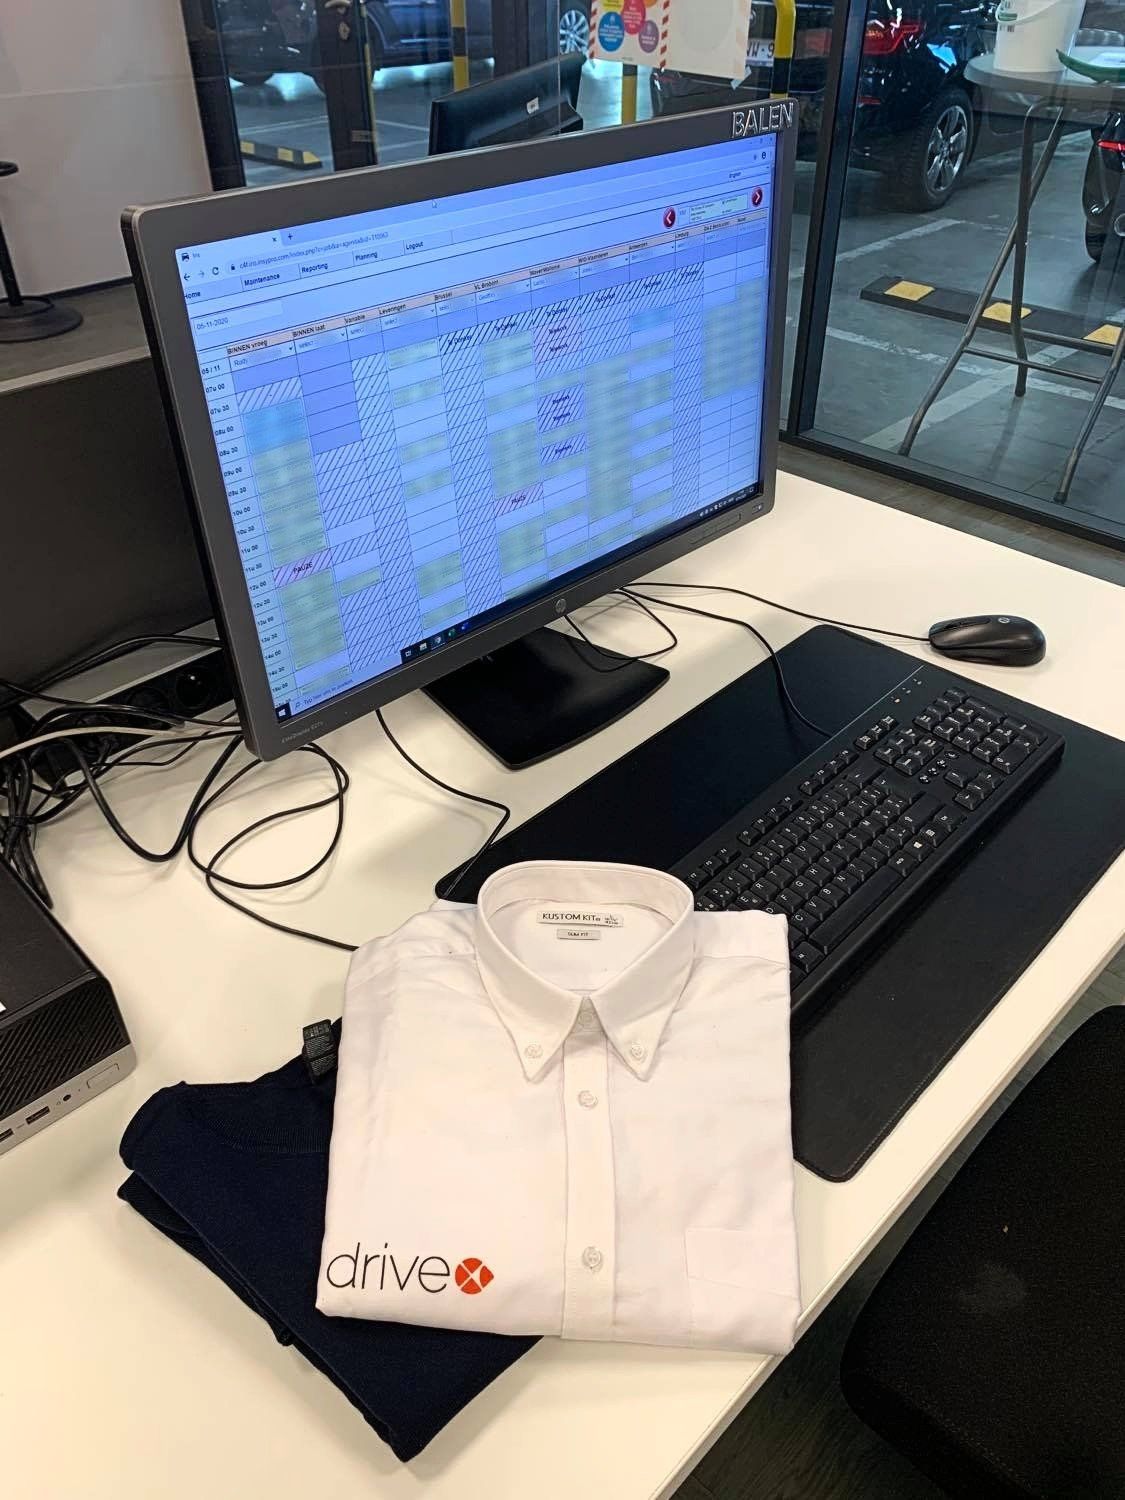 Drivex uniform ready at the desk of an employee.